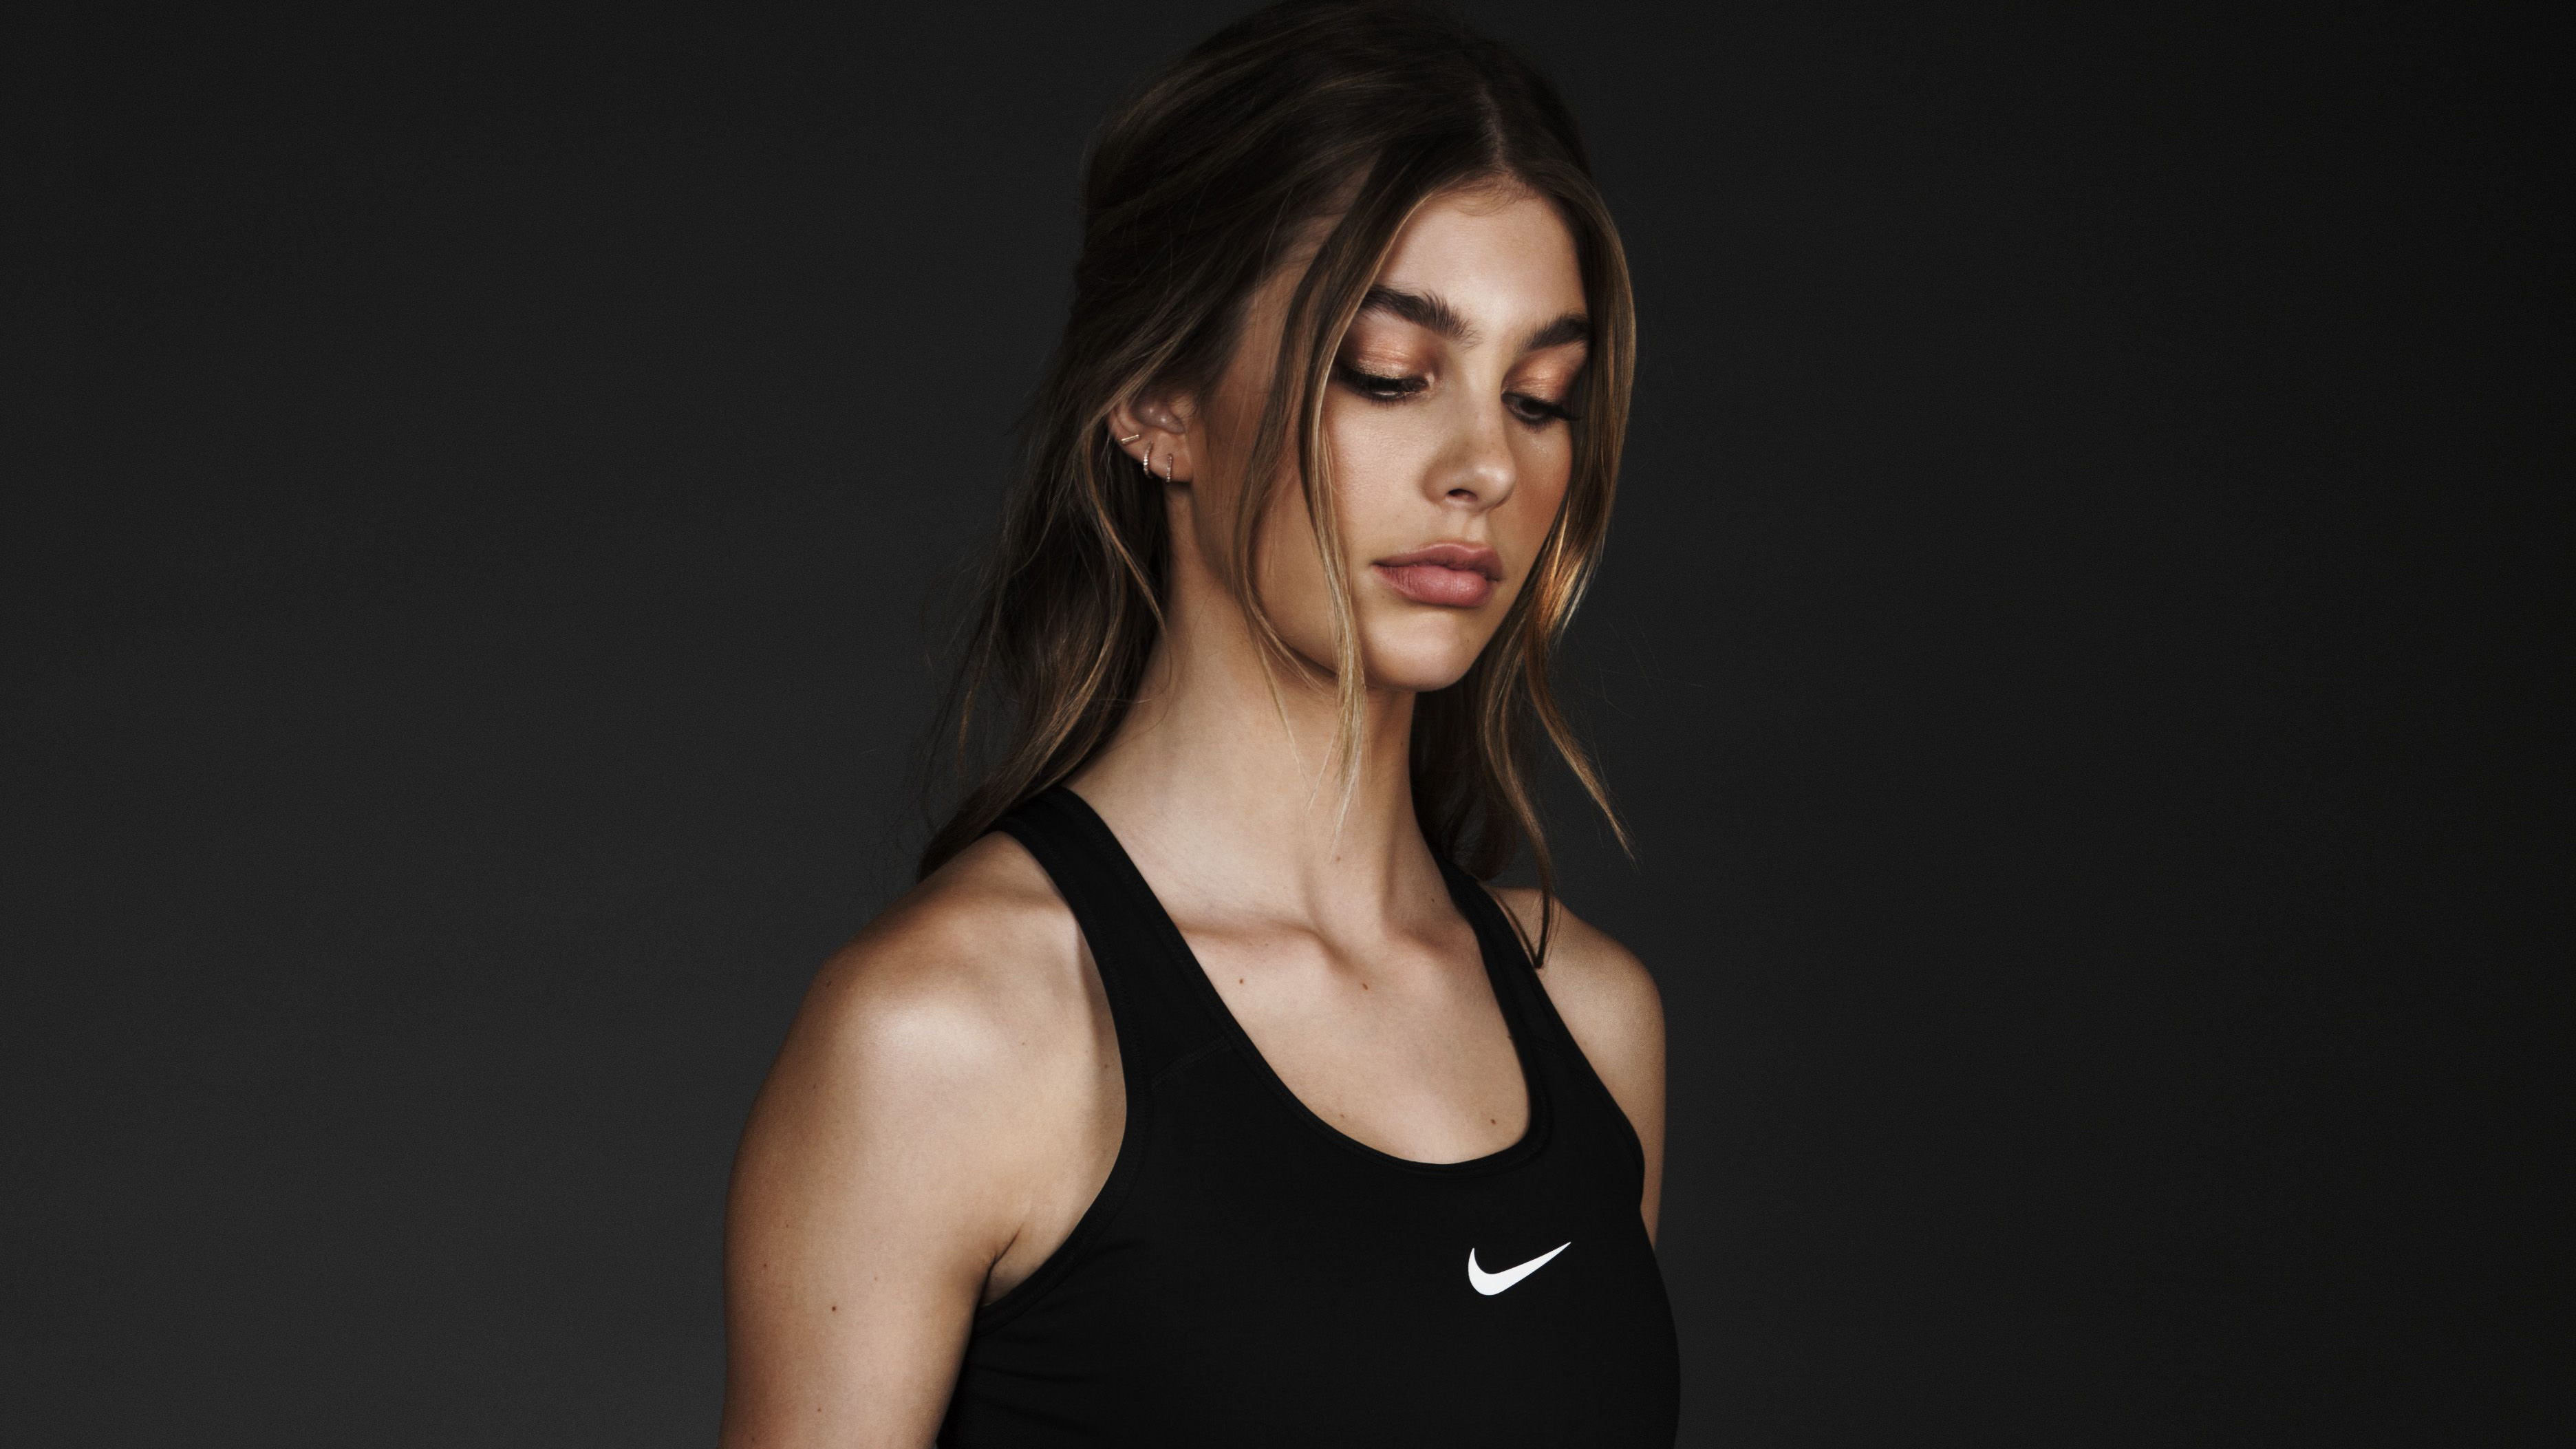 Camila Morrone Model And Actress Wallpapers